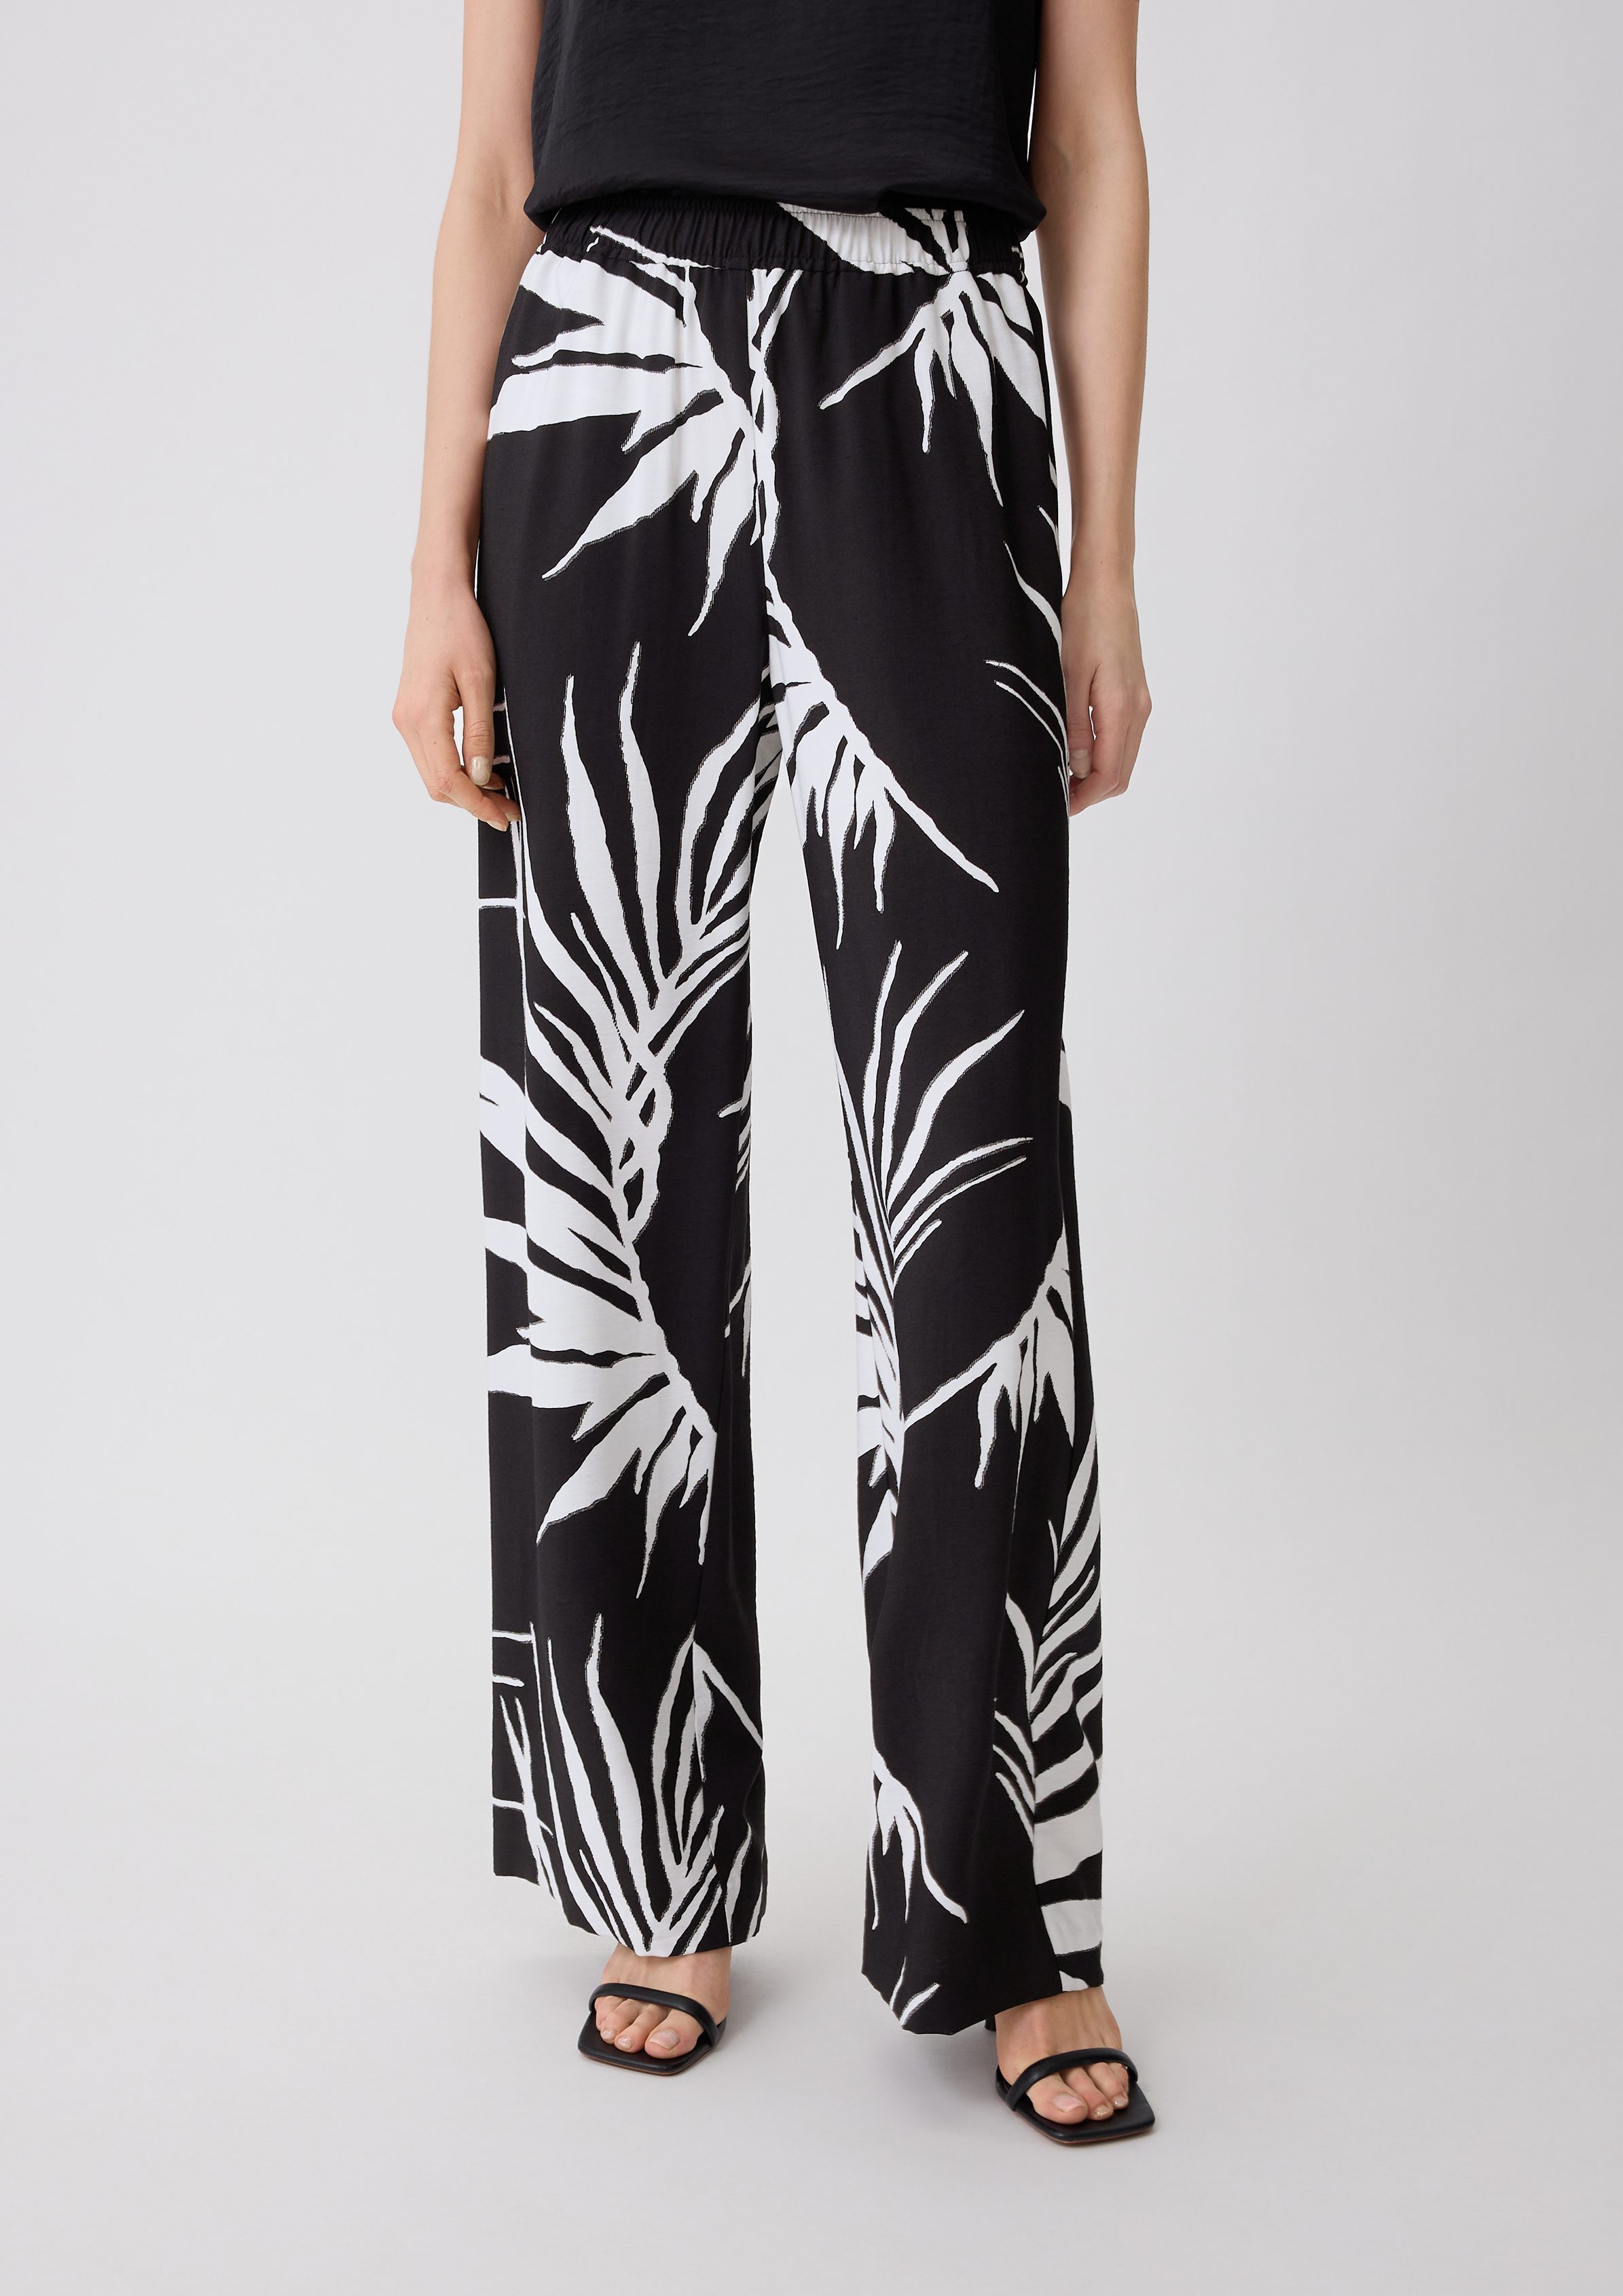 Comma Stoffhose Relaxed: Hose mit schwarz All-over-Print